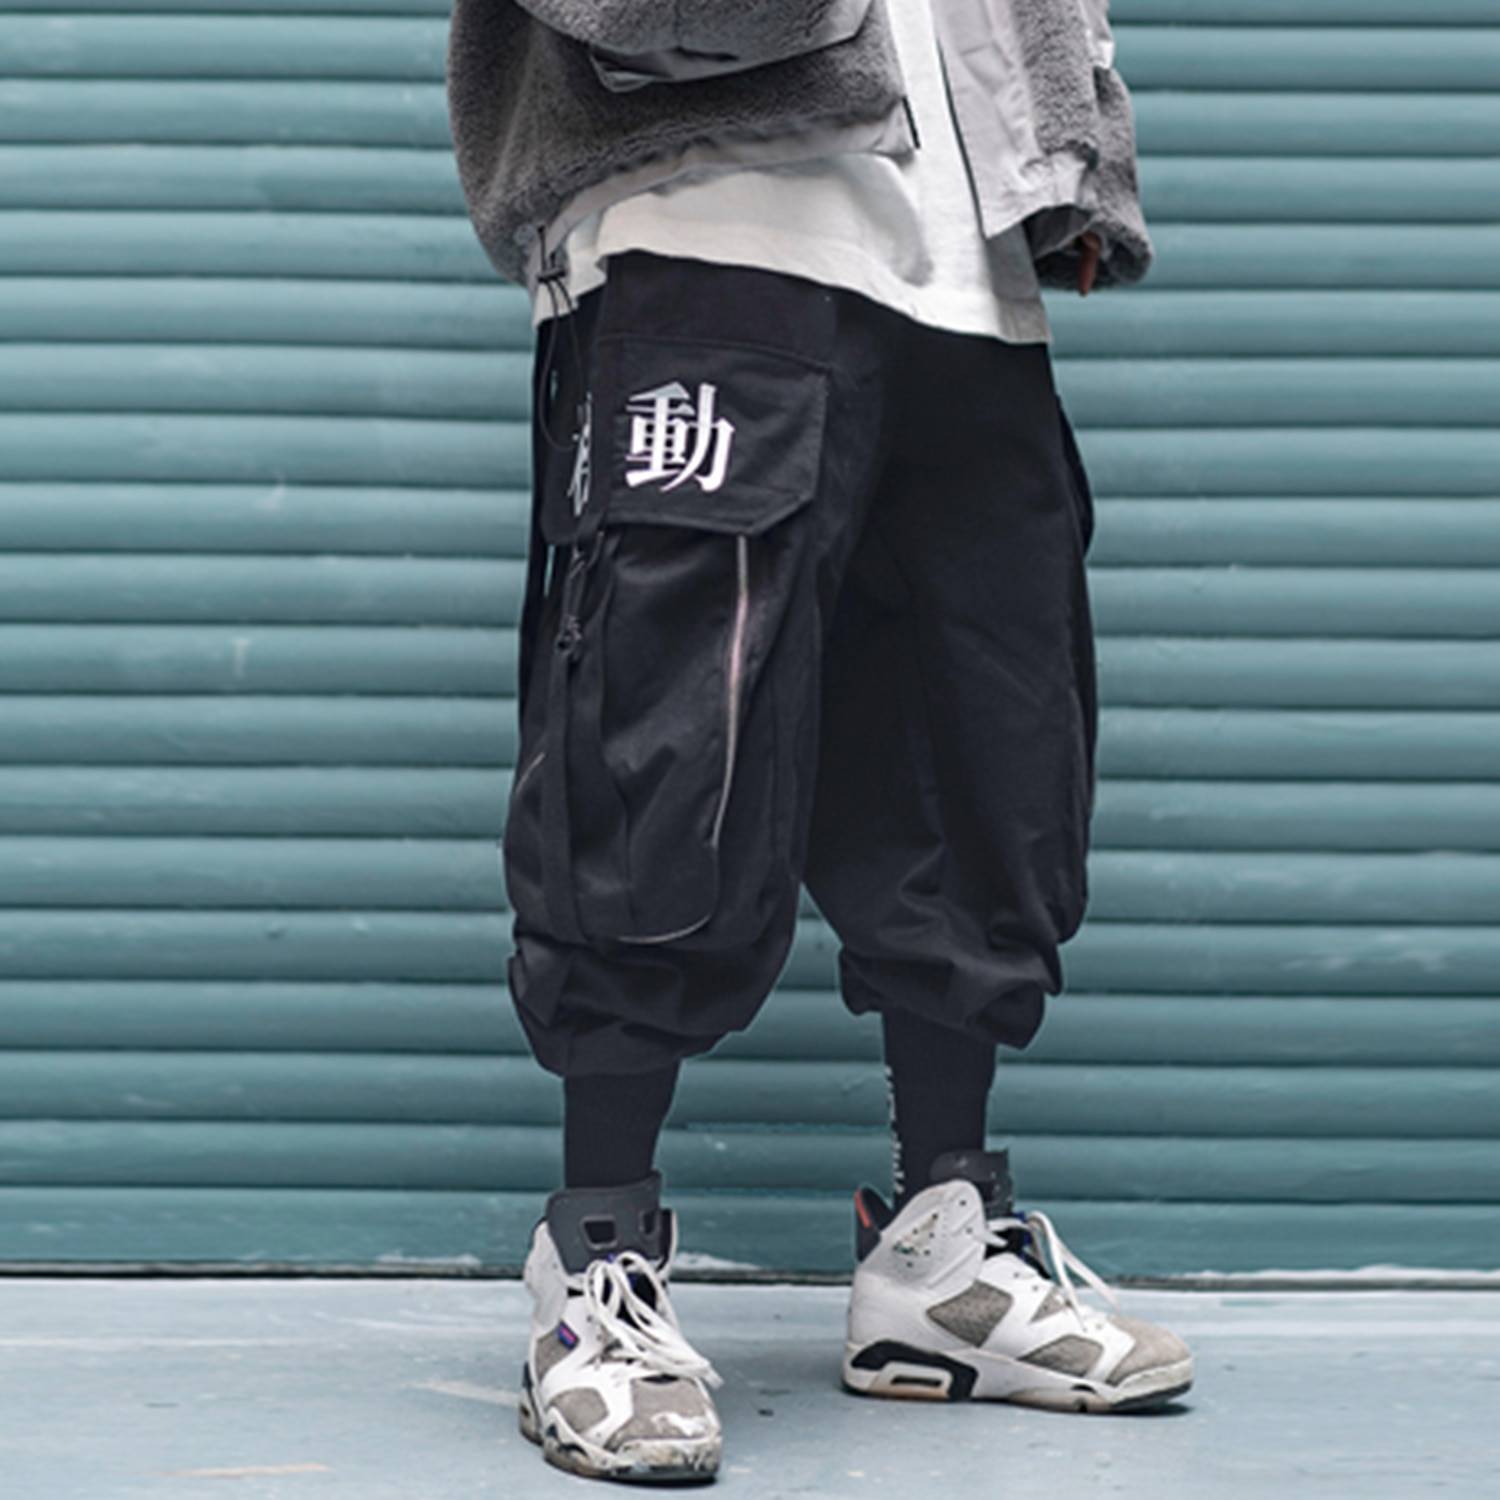 Hawaiian Printed Mens Sweatpants Casual Elastic Hip Hop Printed Trousers  With Ripped Slim Fit And High Street Style From Blueberry12, $23.35 |  DHgate.Com